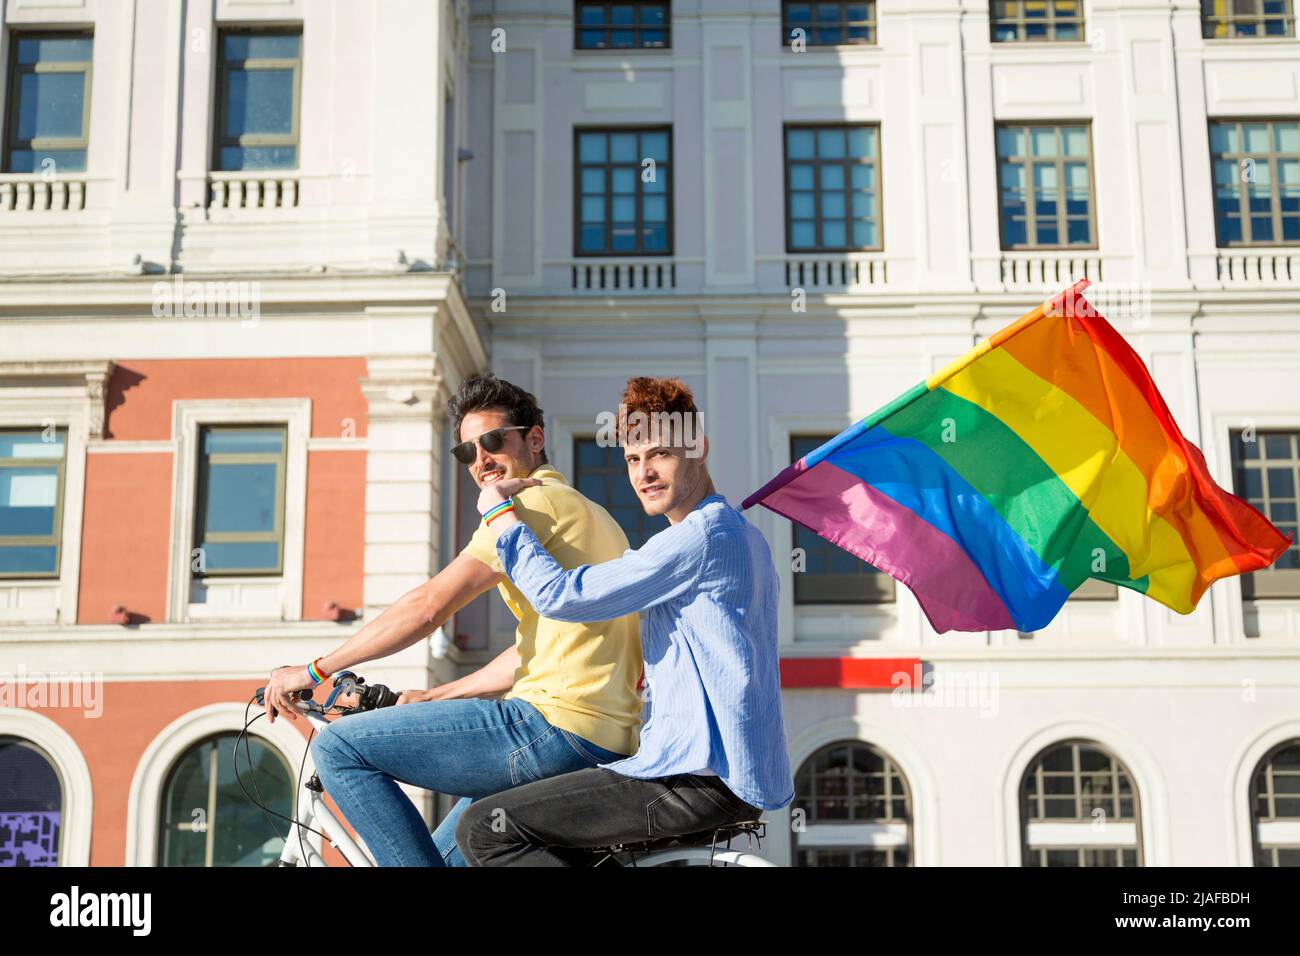 Young gay men couple riding bicycle holding gay pride flag in city looking at camera. lgbt concept Stock Photo